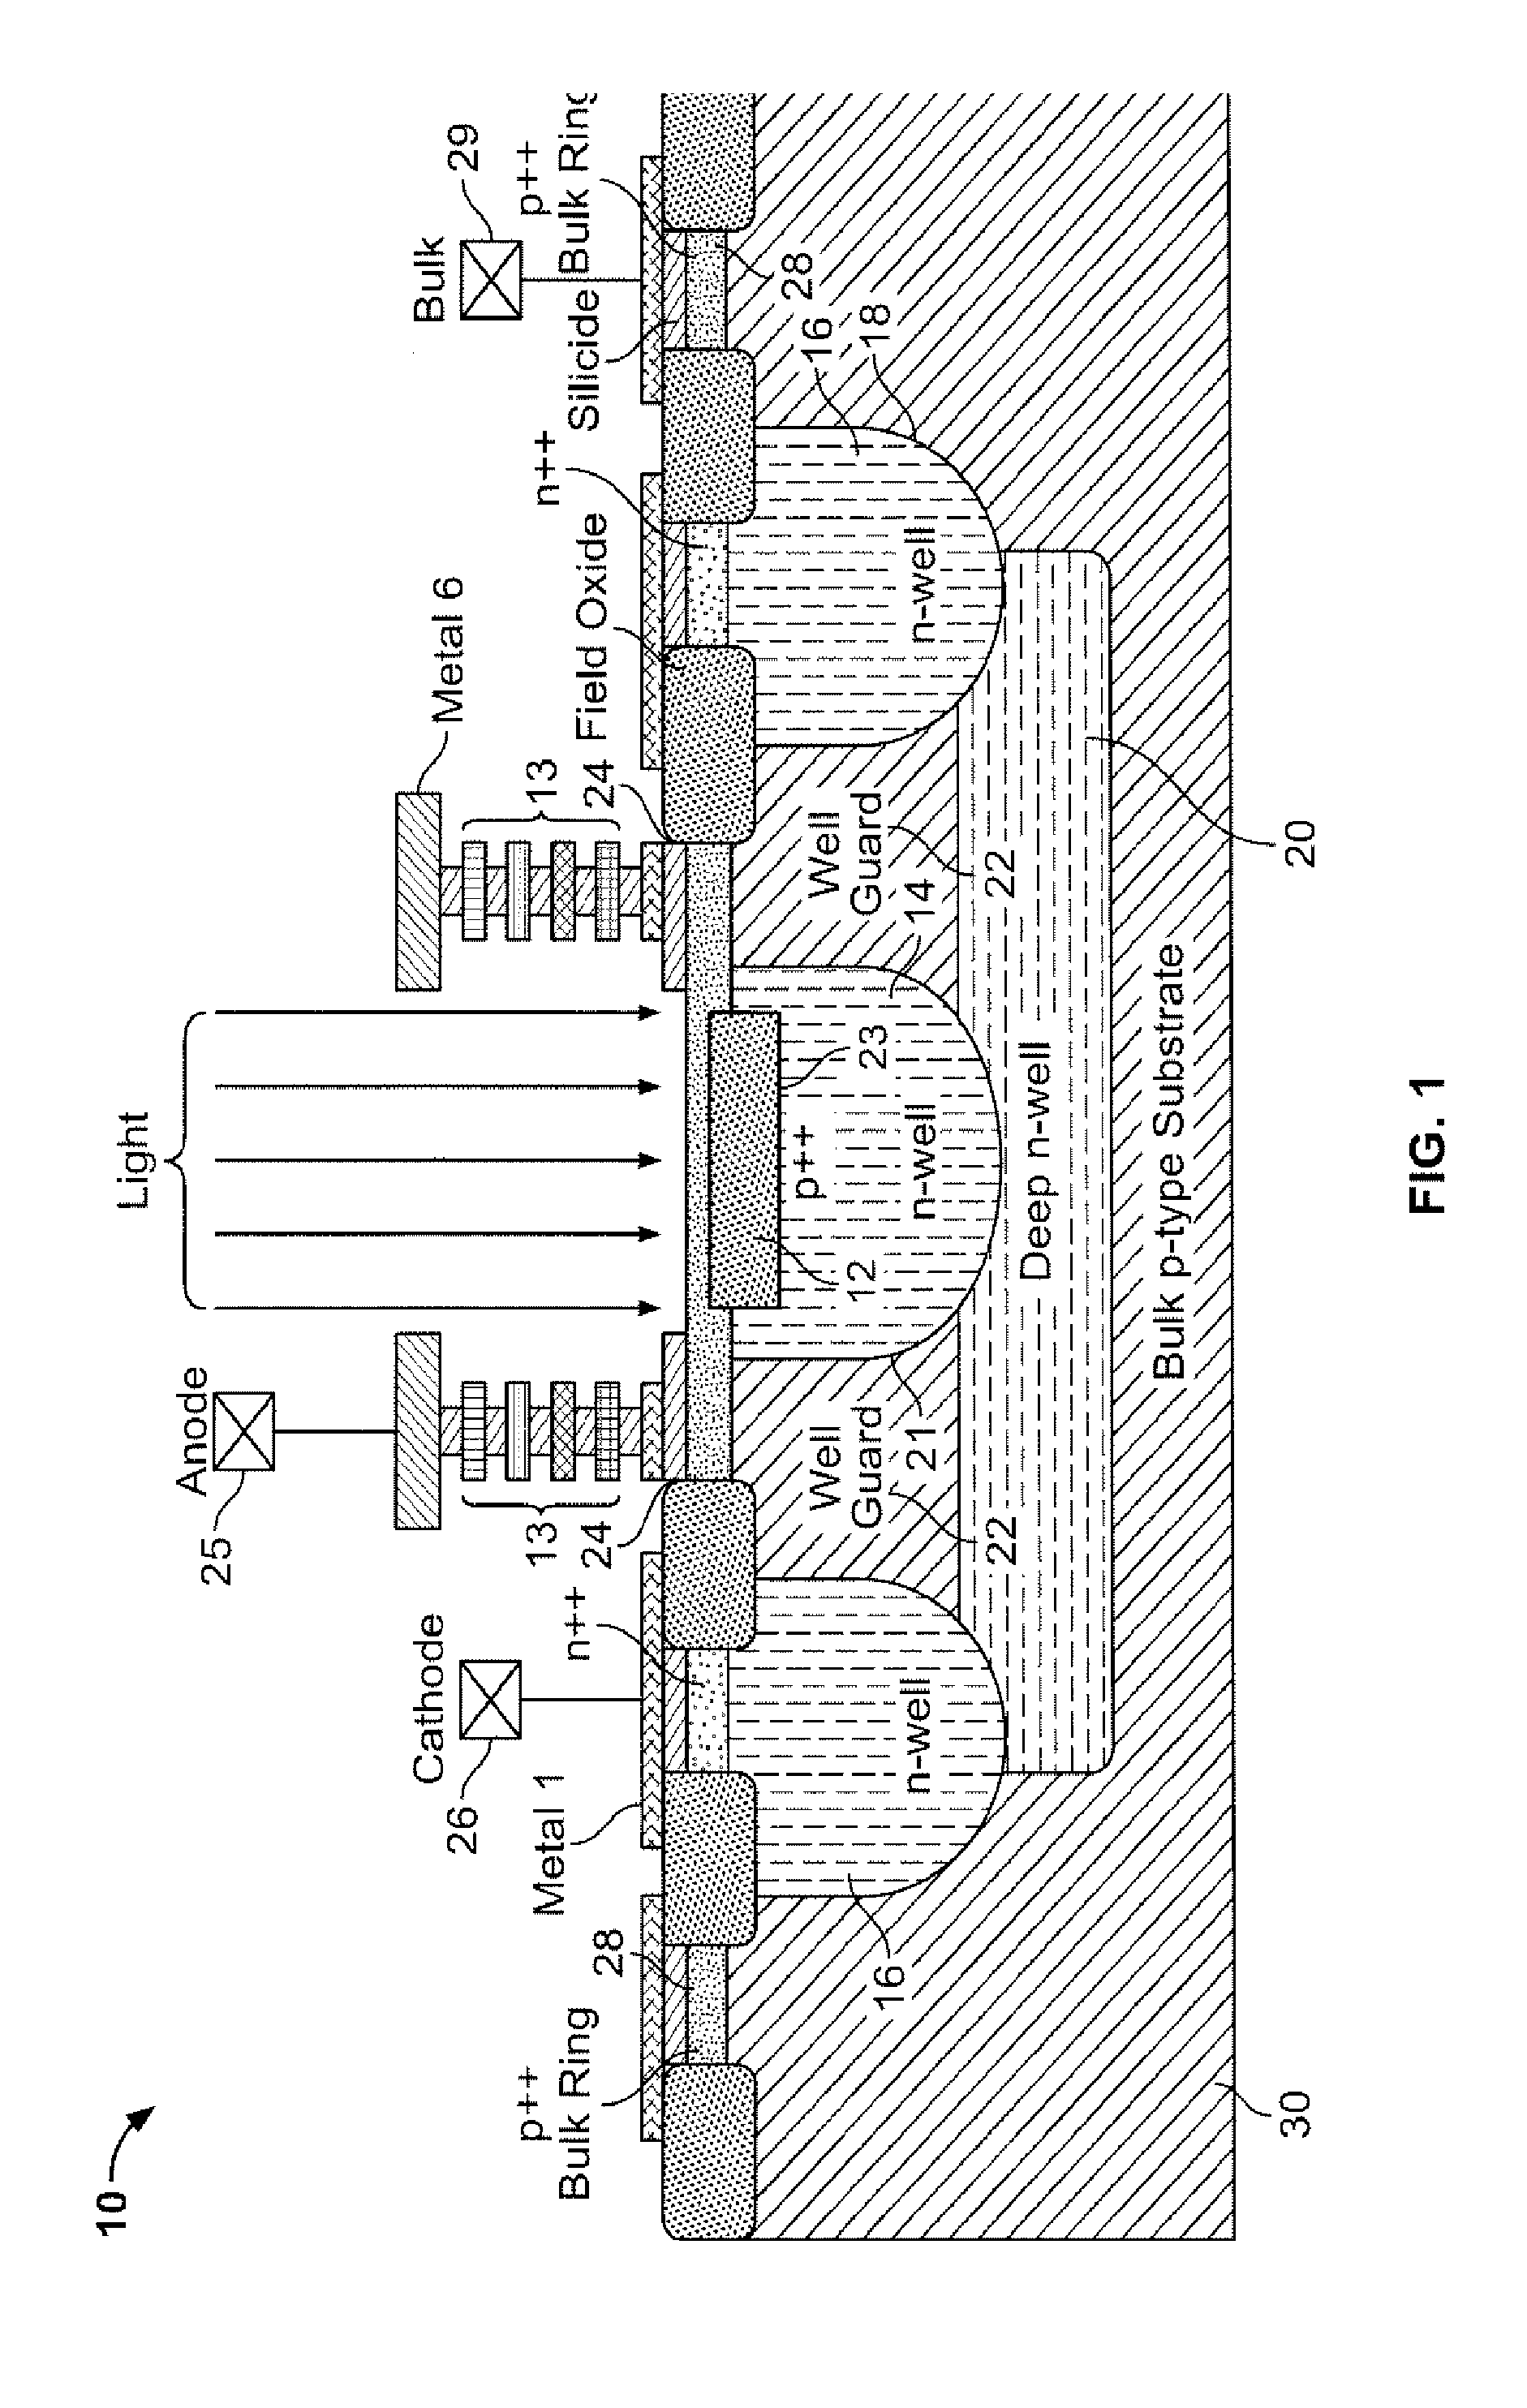 Deep submicron and NANO CMOS single photon photodetector pixel with event based circuits for readout data-rate reduction communication system